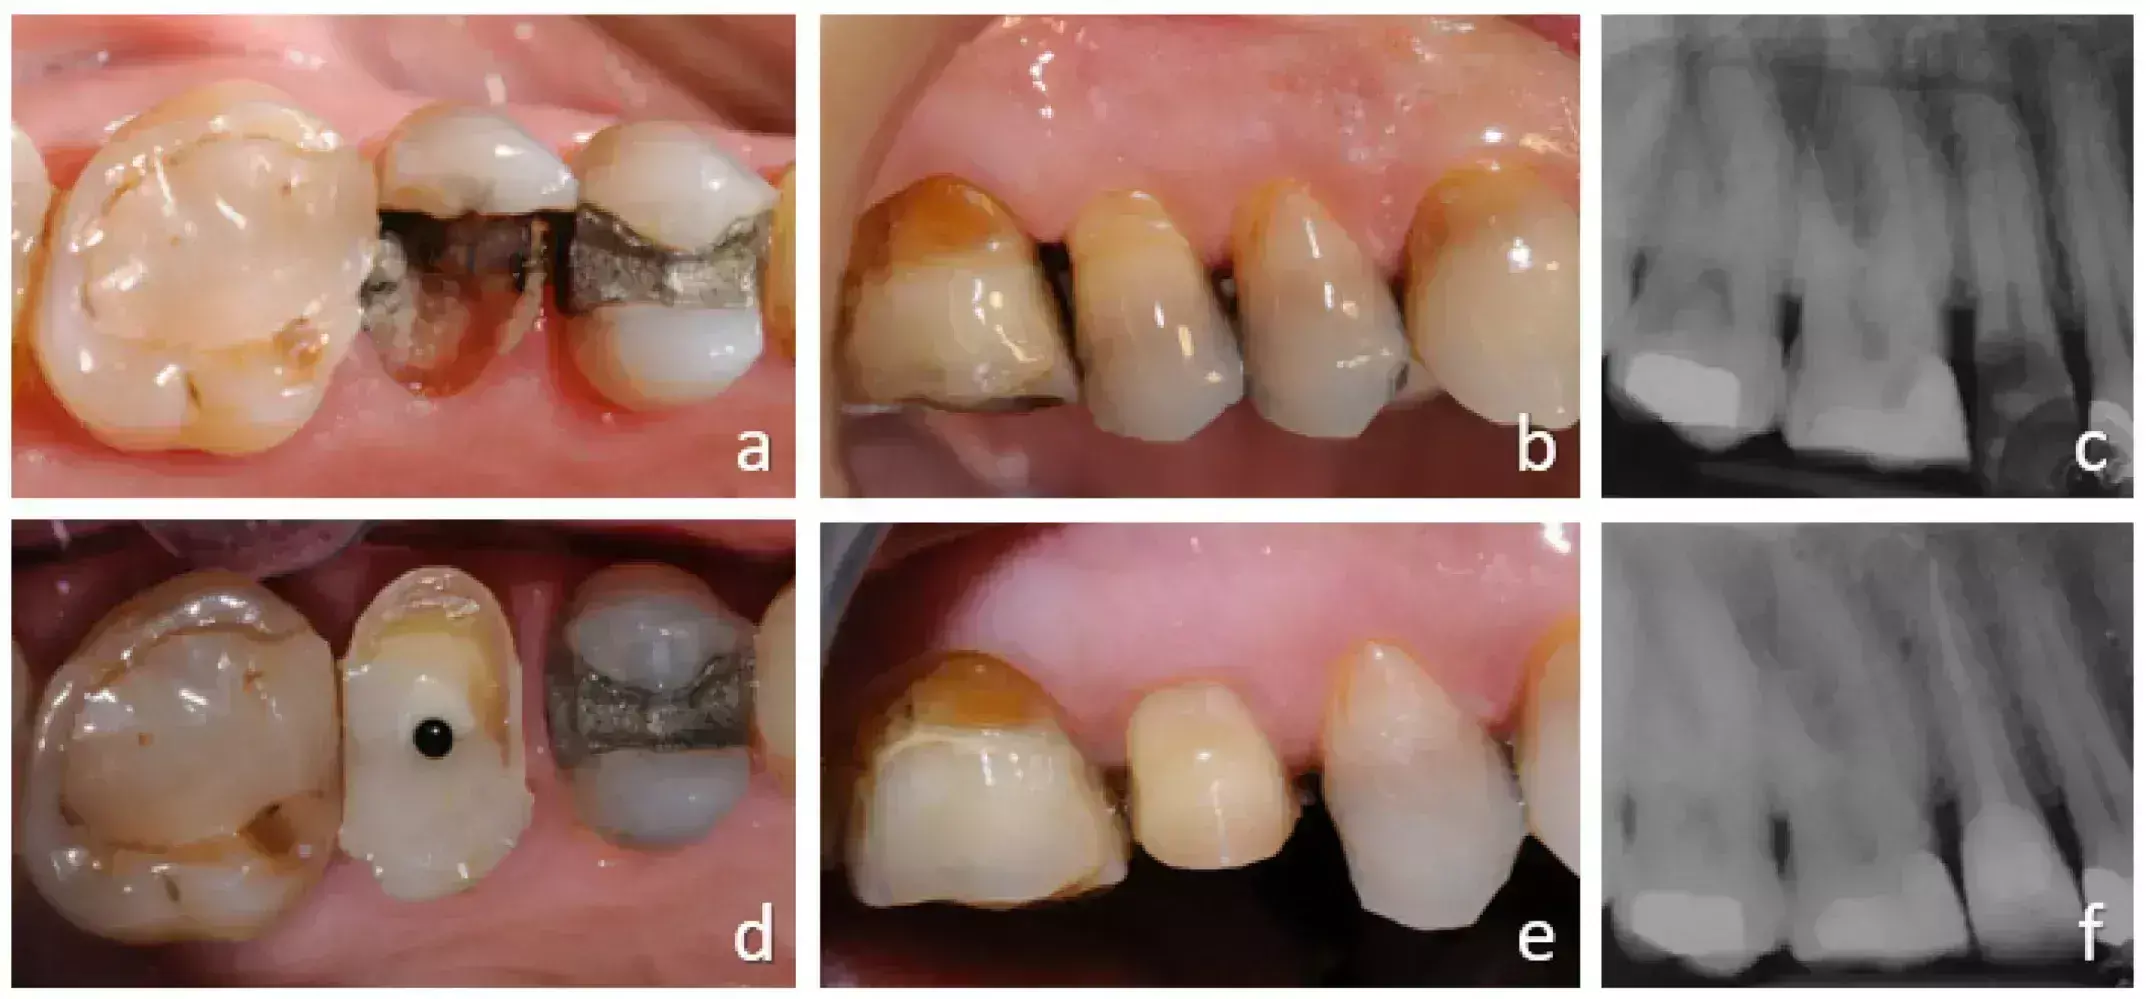 Loss of tooth structure, vertical root fracture and periodontal disease tied to extraction of root canal-treated teeth: Study